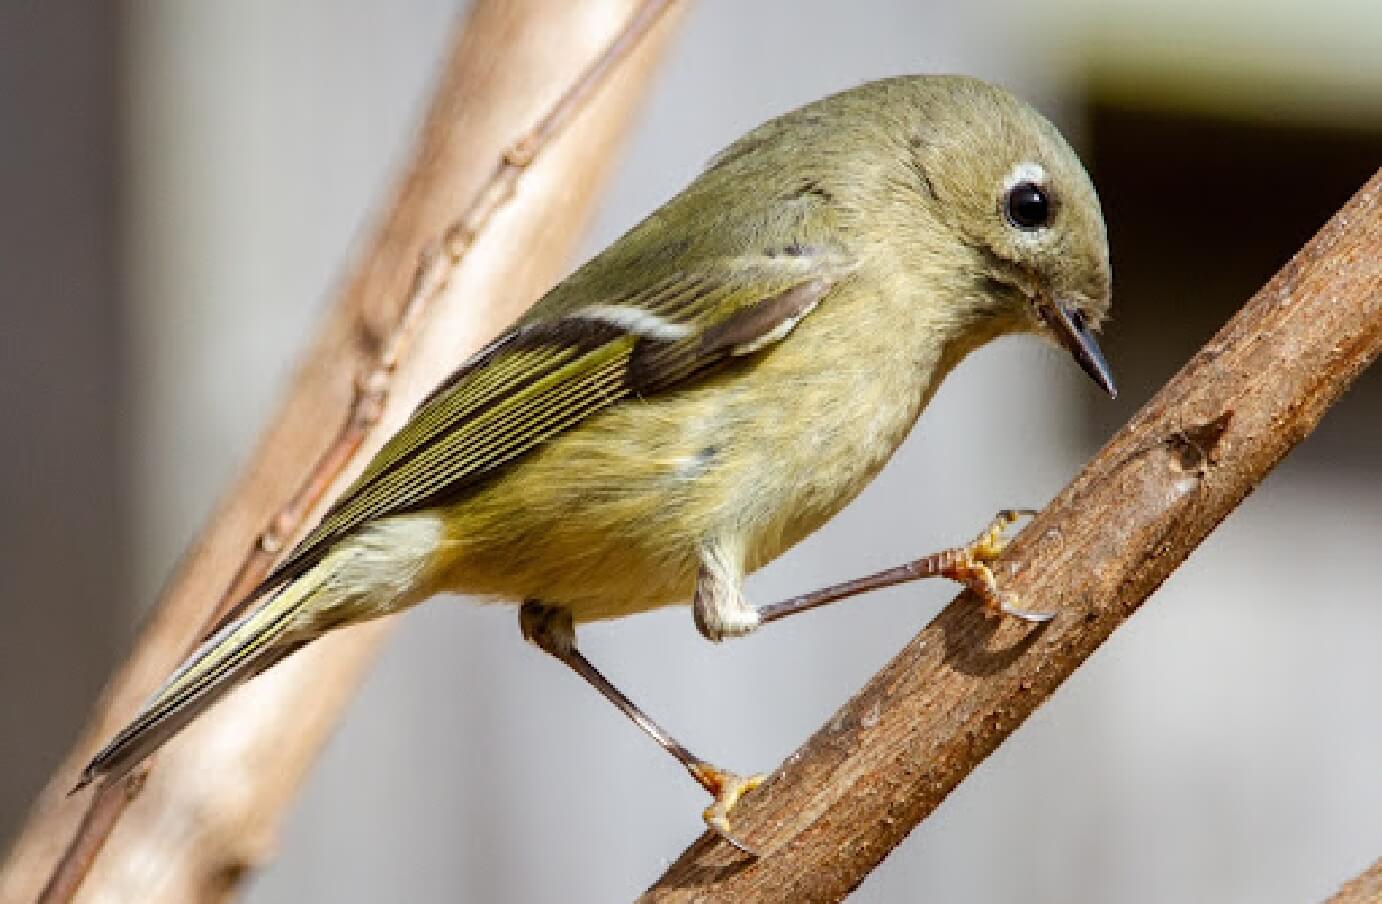 a Ruby-Crowned Kinglet perched on a branch, pressing it's beak into the brach